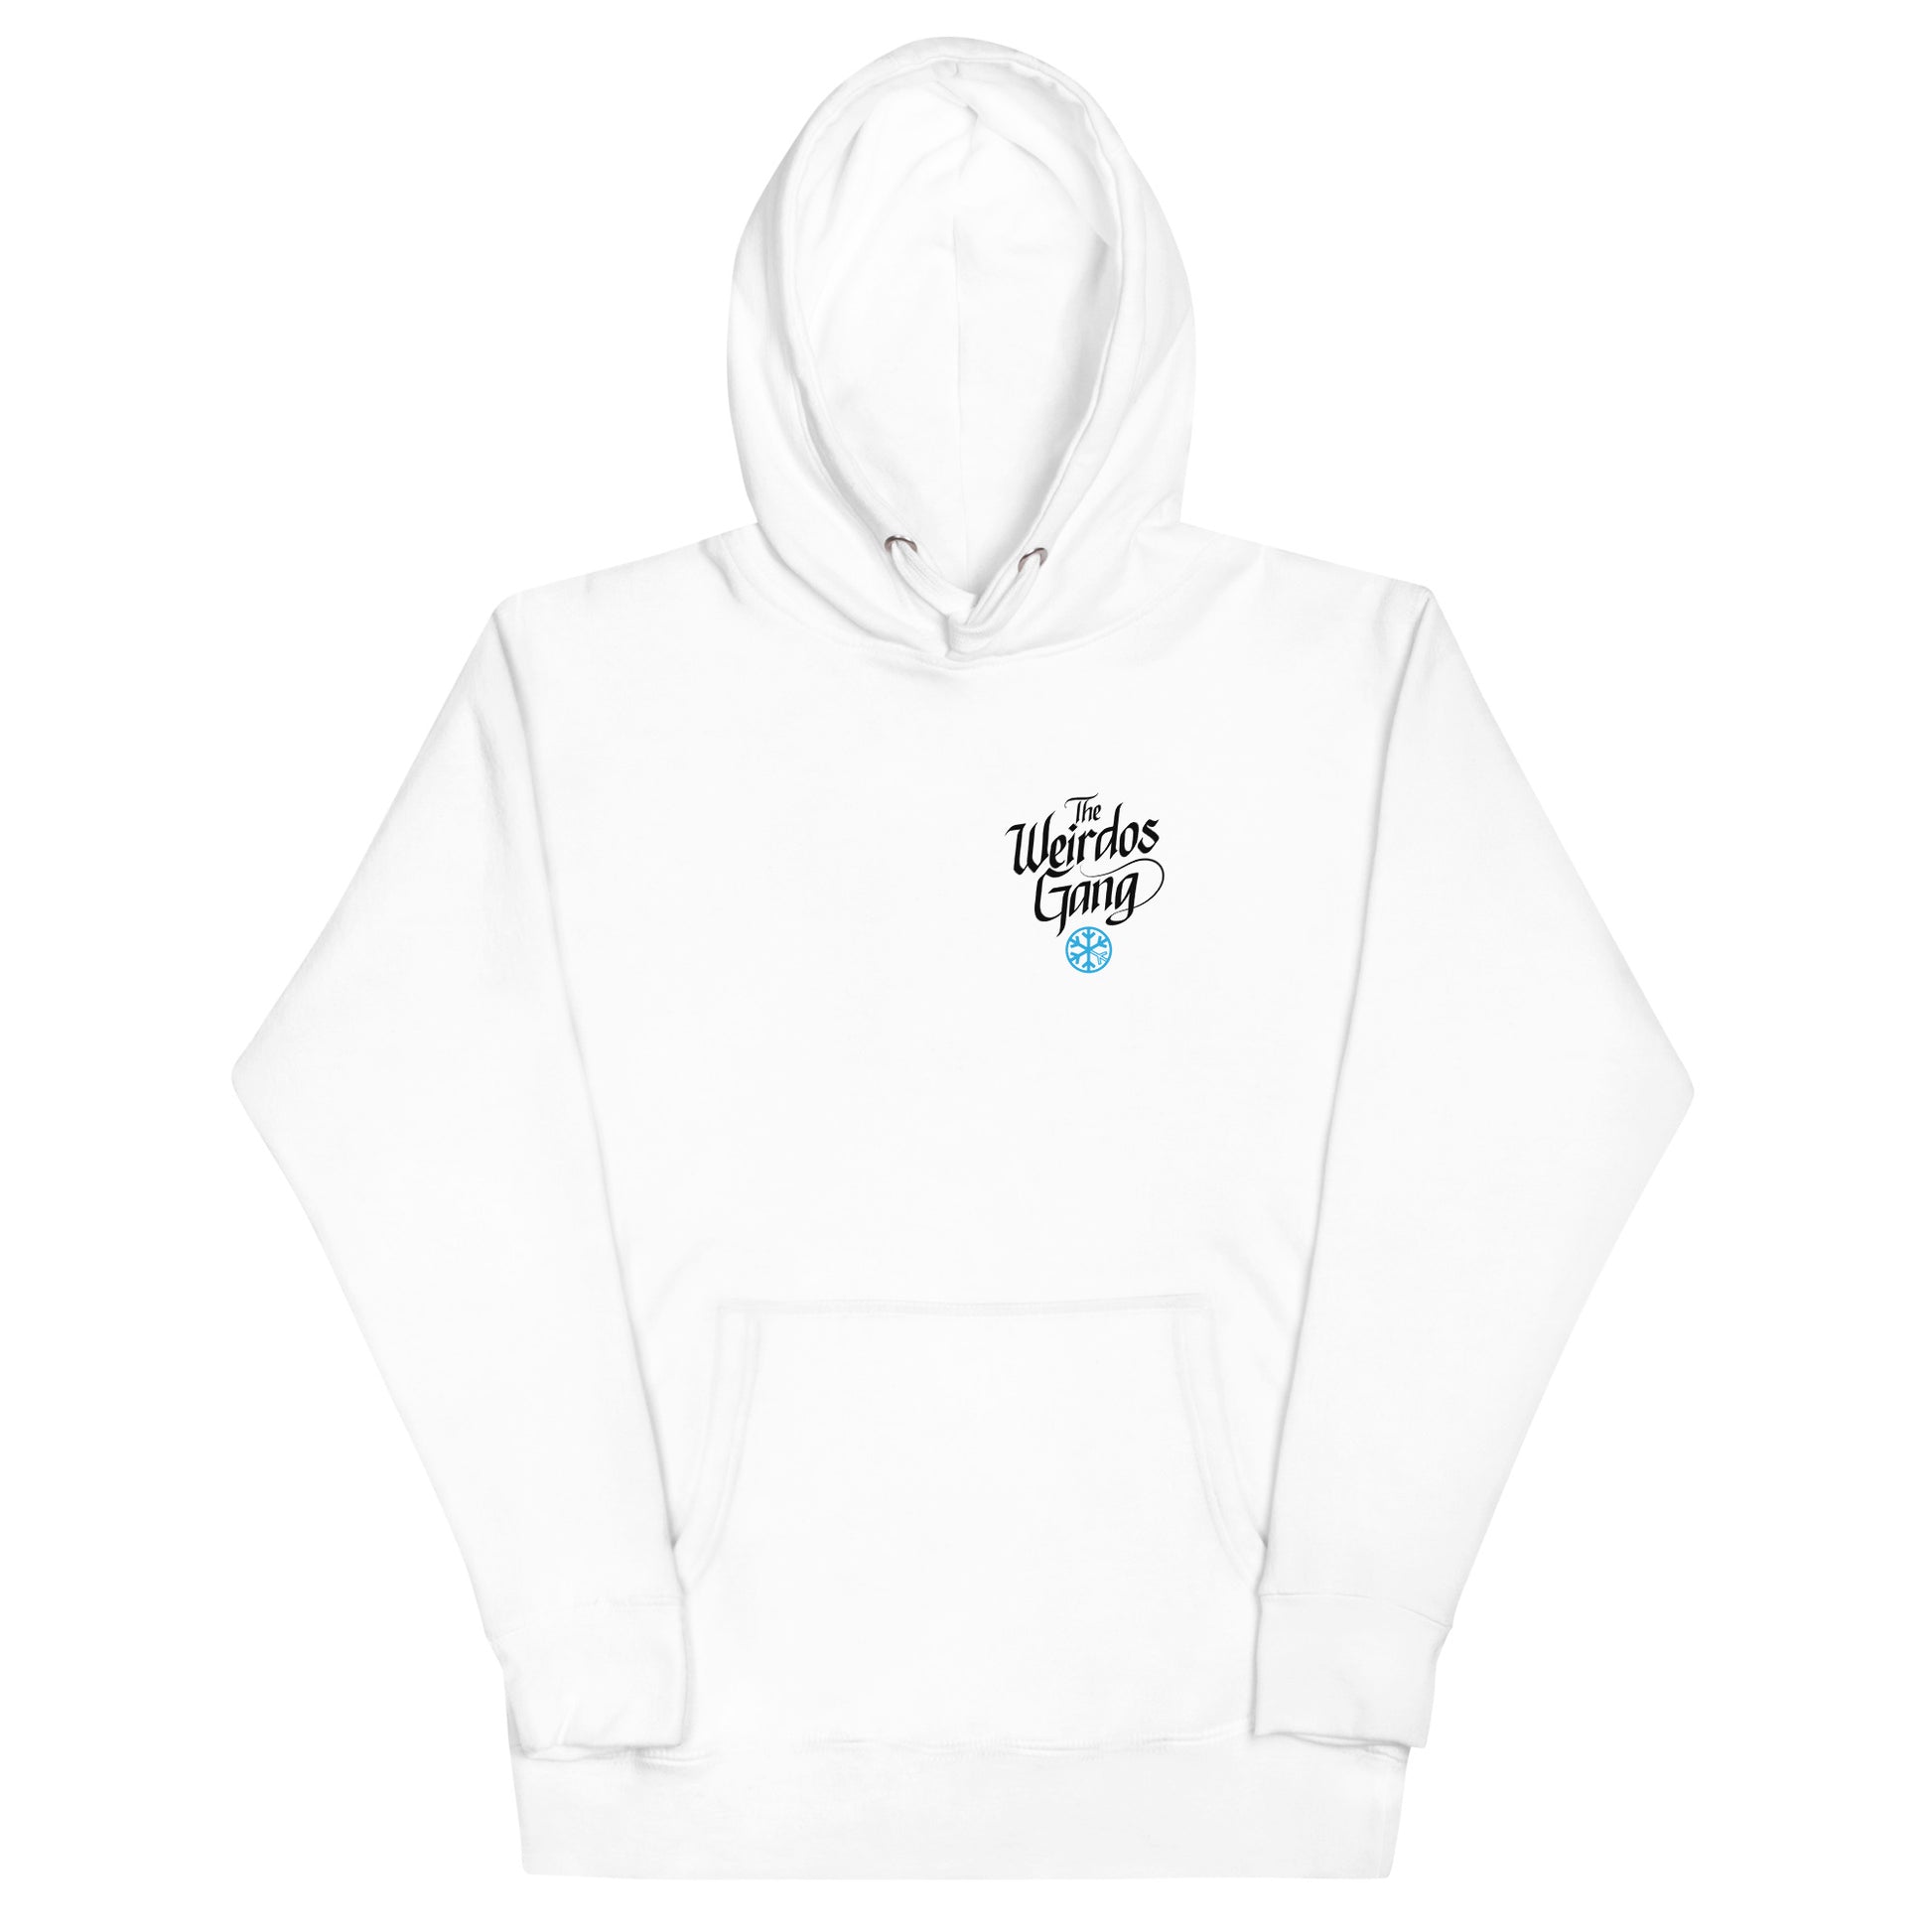 front of Weirdos Gang lettering hoodie white by B.Different Clothing street art graffiti inspired brand for weirdos, outsiders, and misfits.